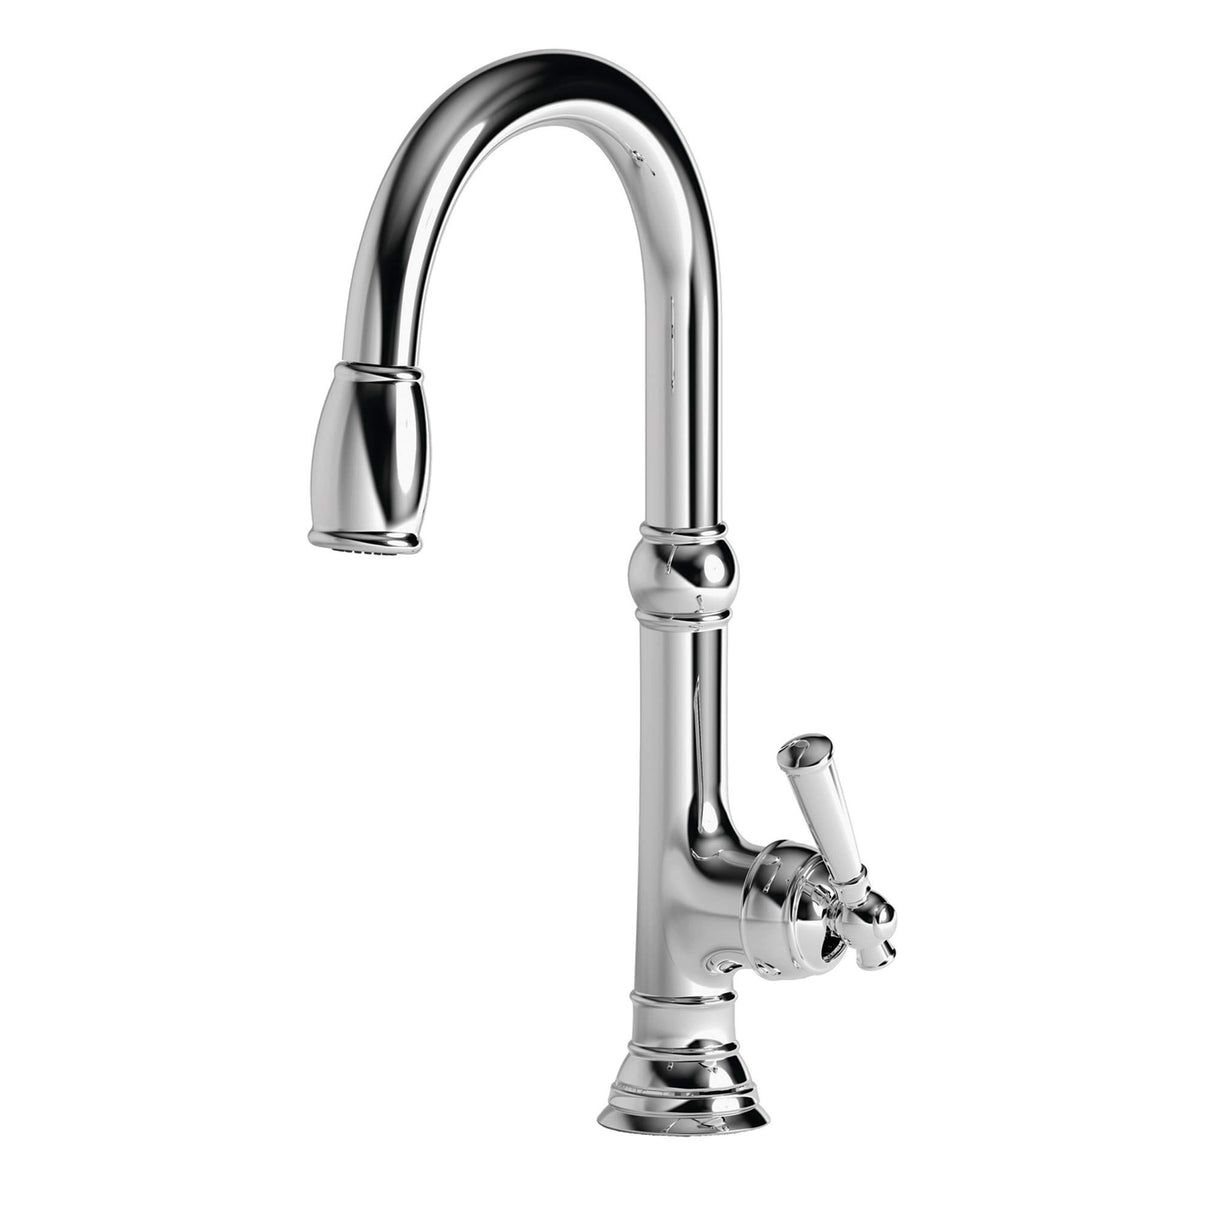 Newport Brass 2470-5103 Jacobean Kitchen Faucet with Metal Lever Handle and Pull, Polished Chrome